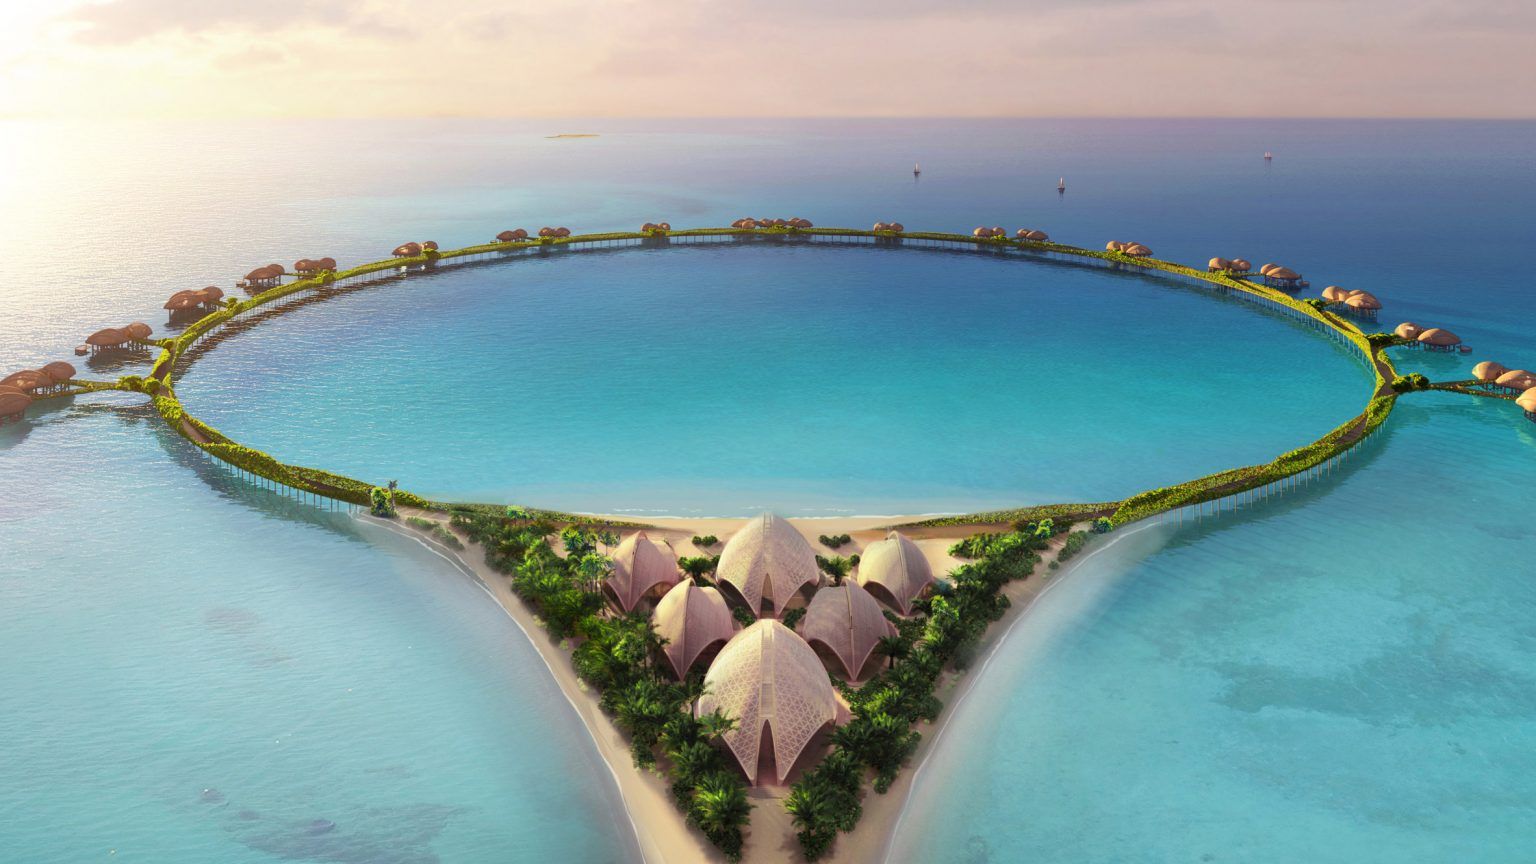 Hotel on stilts on the Red Sea | Foster+Partners